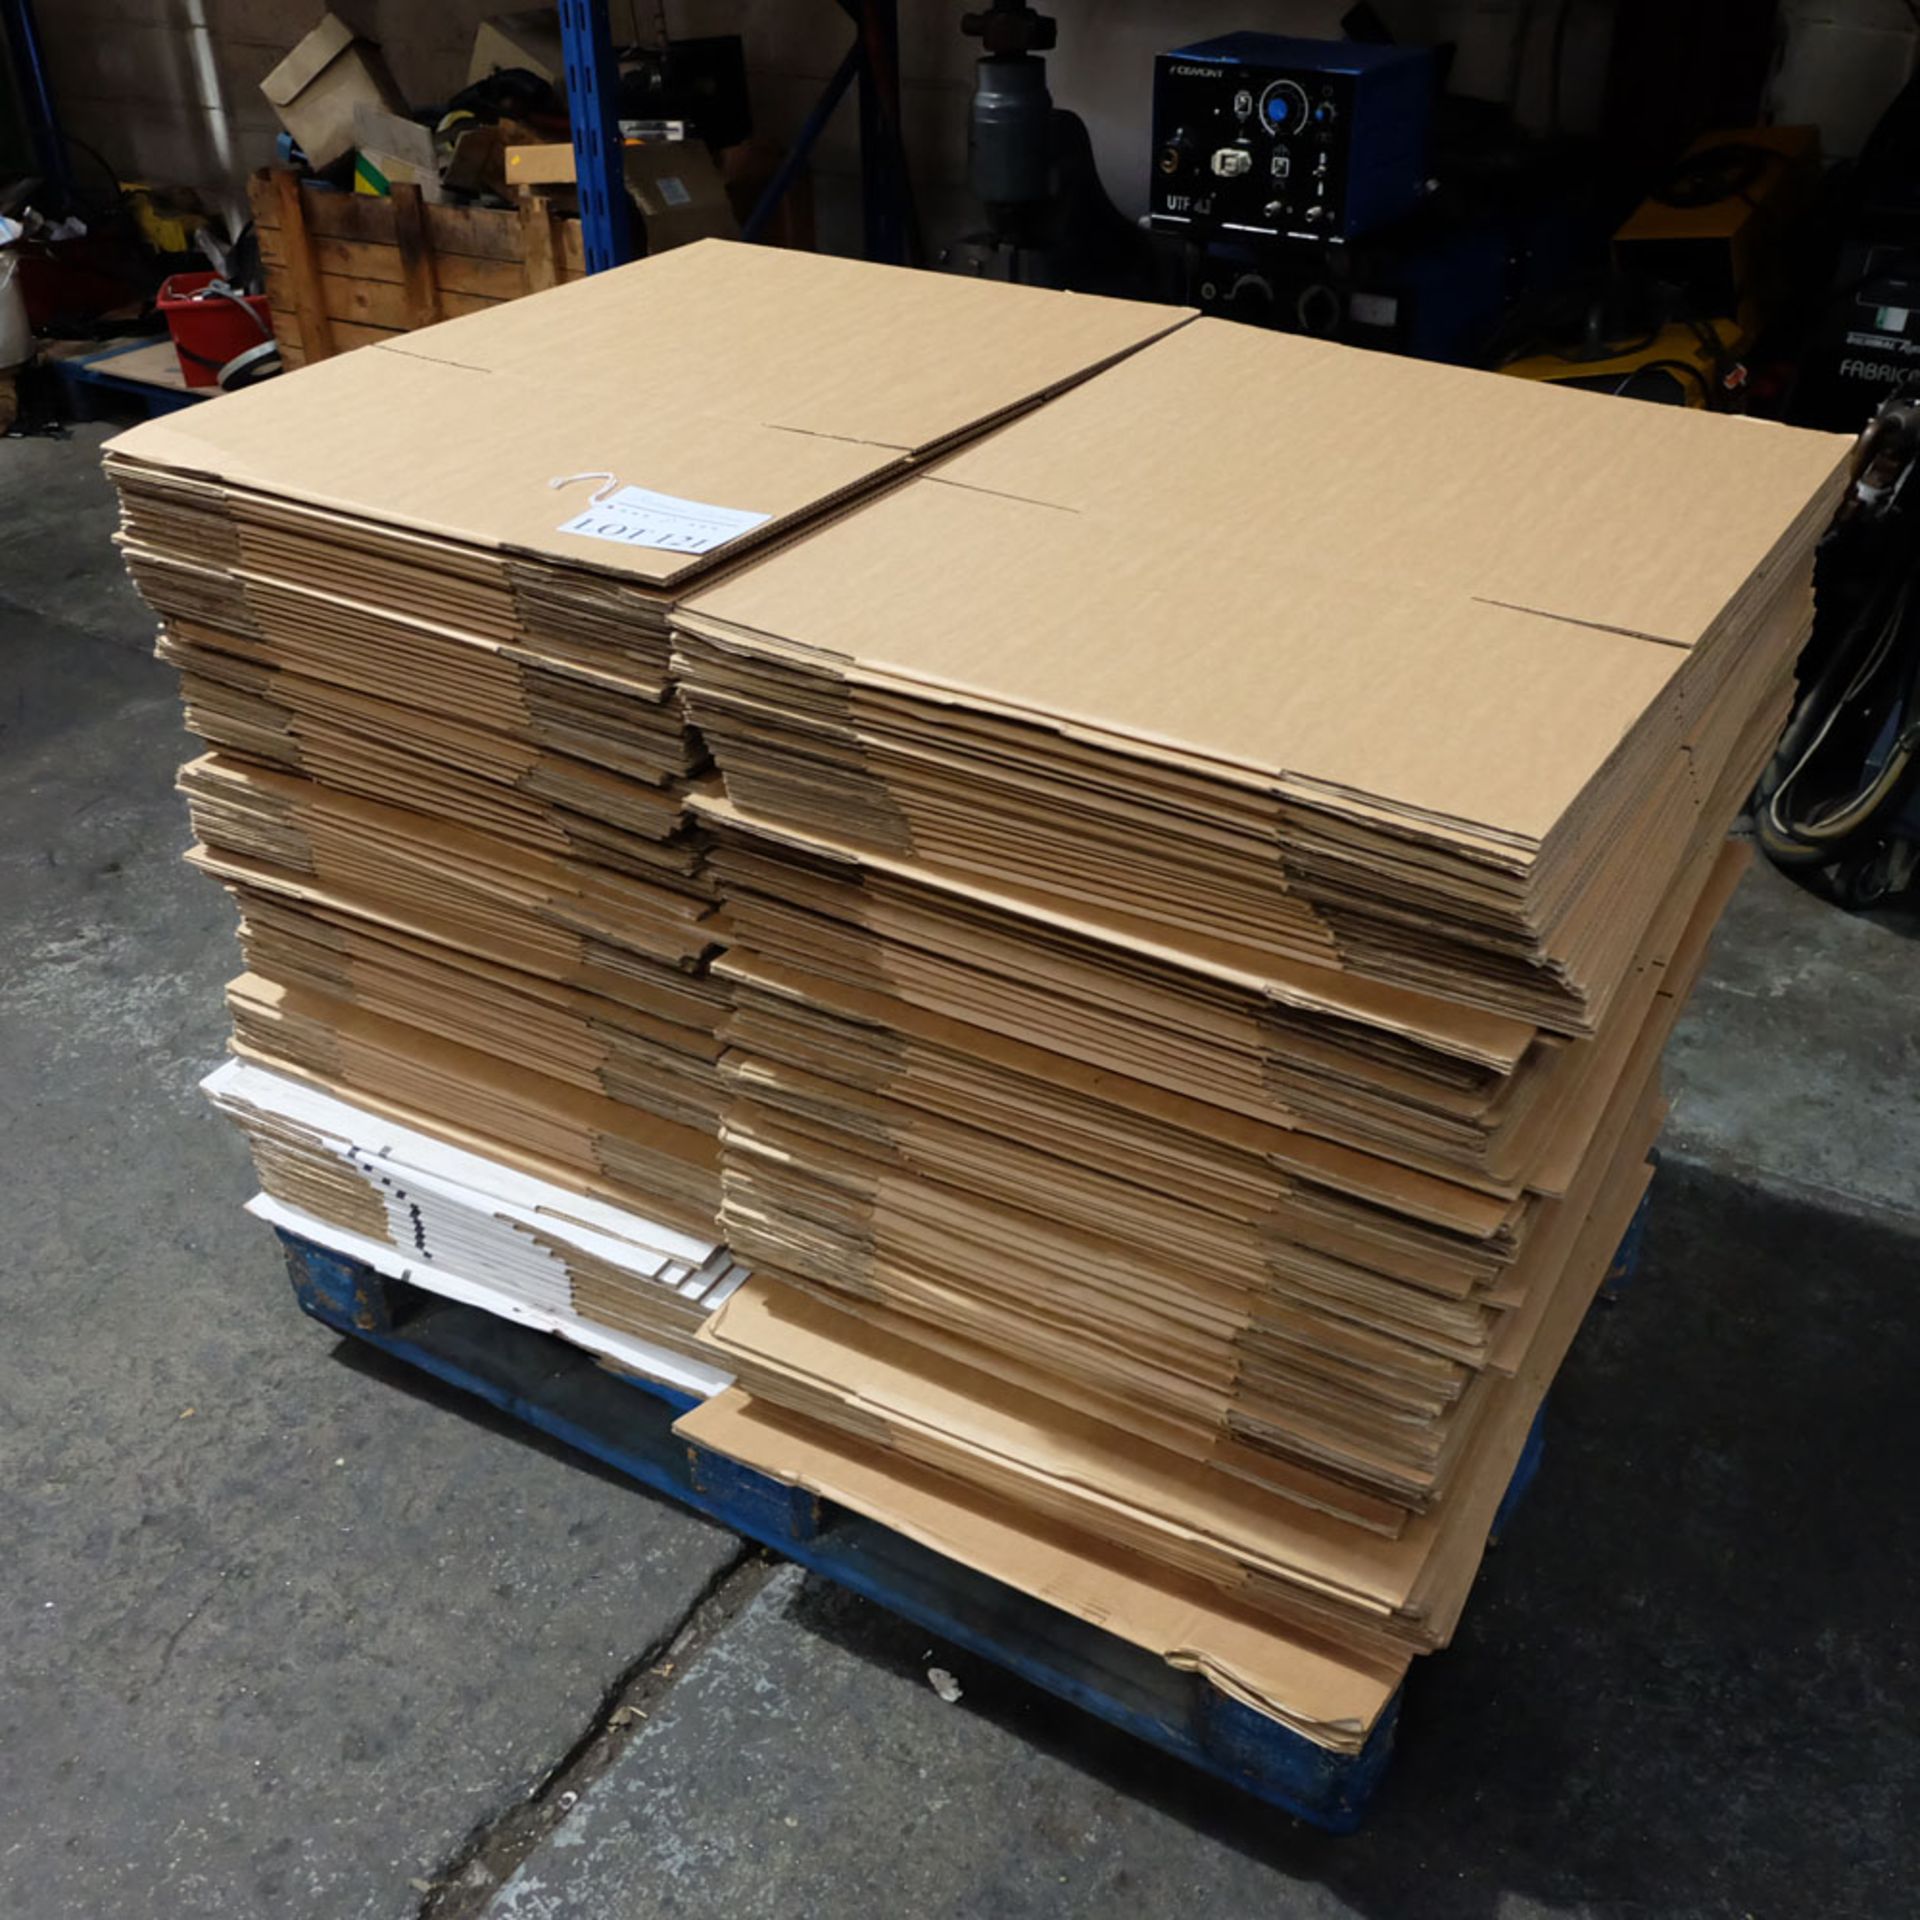 Pallet of Cardboard Boxes. Approx Size (flat) 24 1/2 x 32". - Image 4 of 7